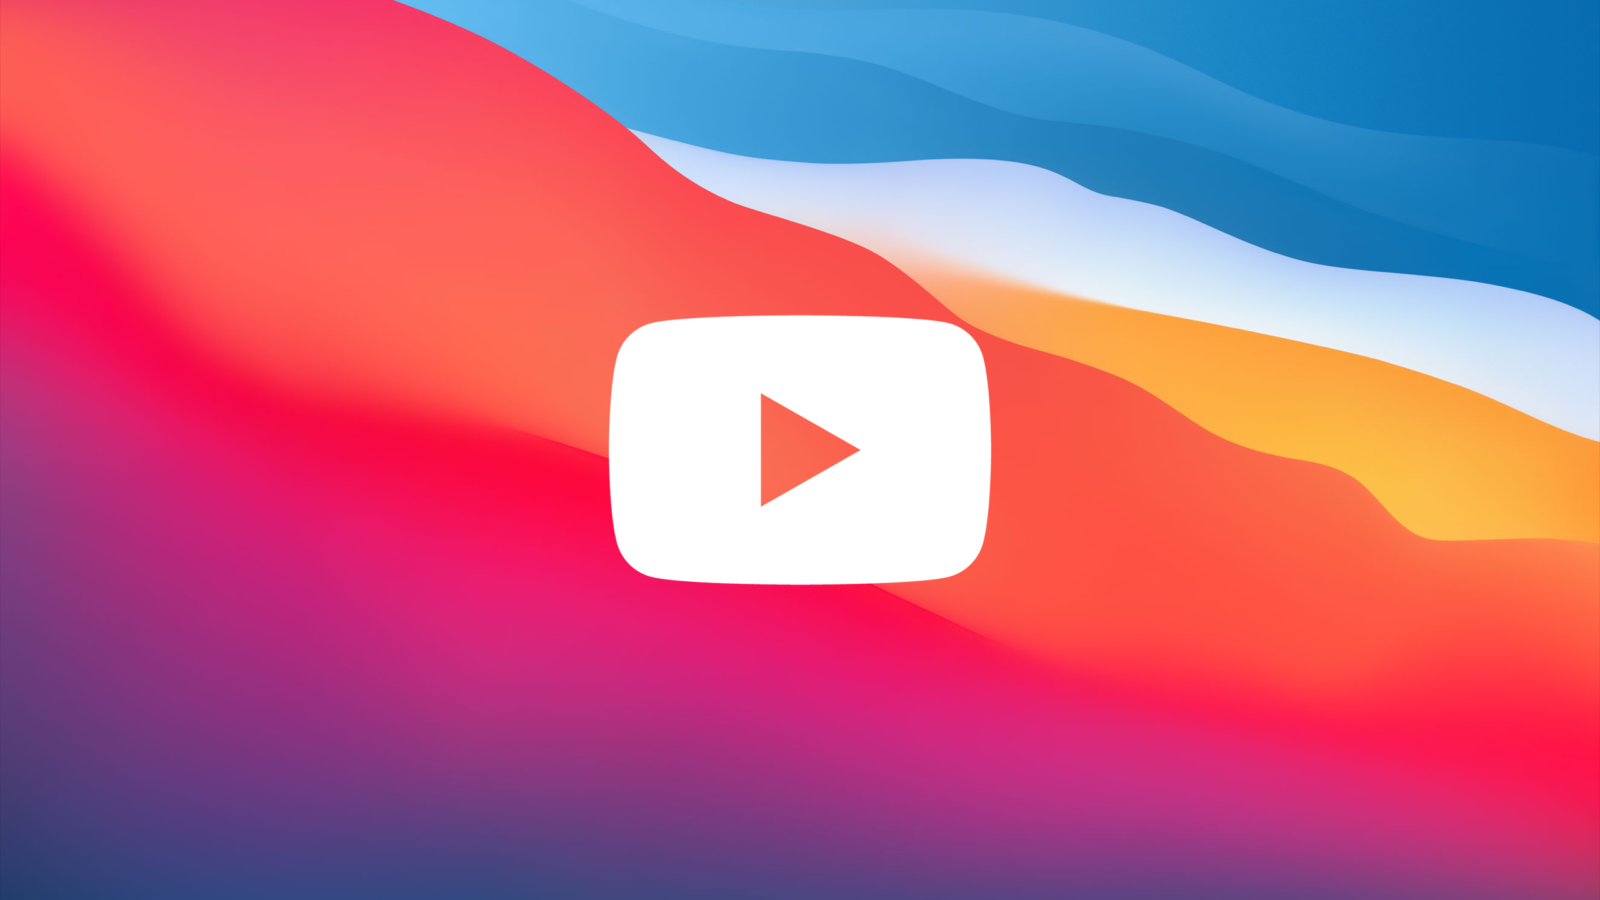 YouTube revamps video player for Android and iOS